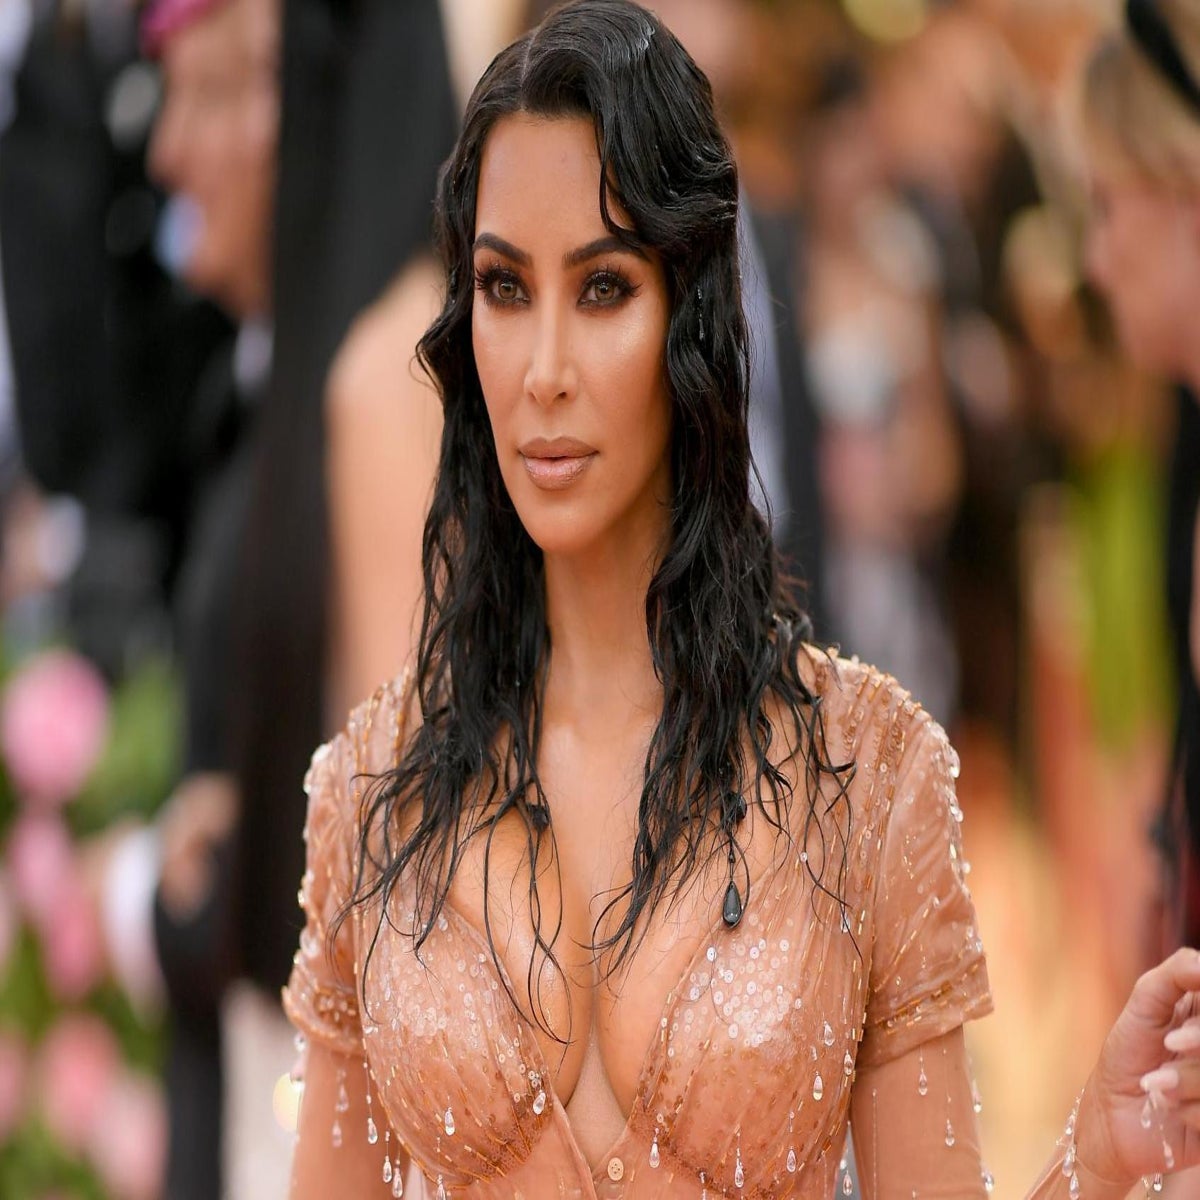 Kim Kardashian Full Sex Video 40 - Kim Kardashian describes anxiety over tight dress in new Met Gala video |  The Independent | The Independent